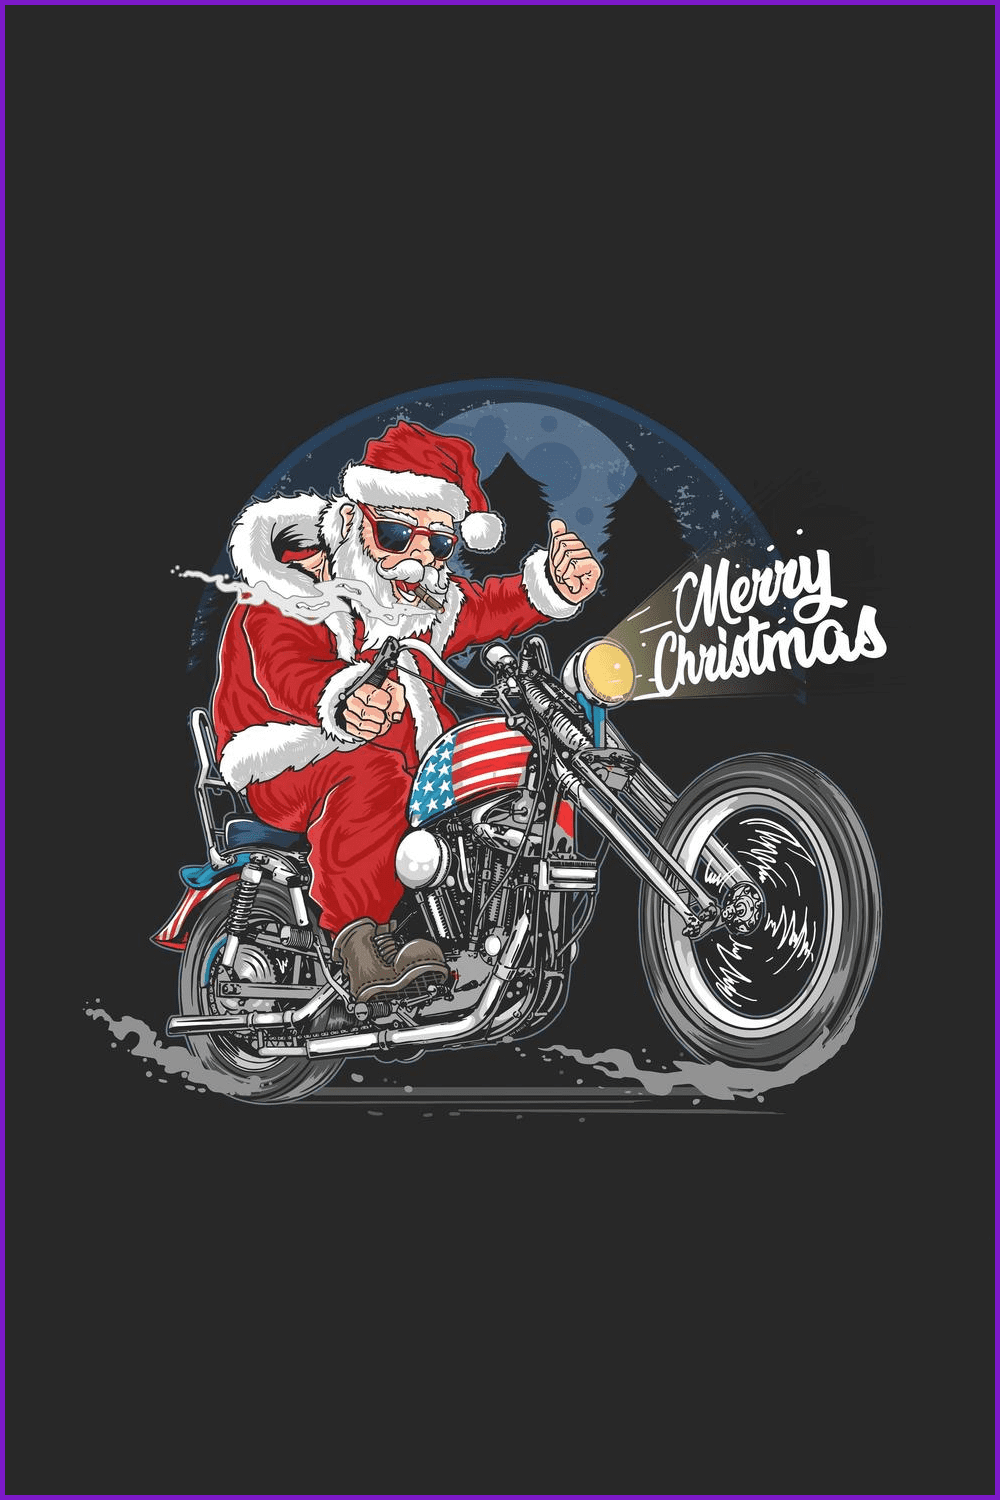 Santa Claus on a motorcycle with a cigar and an American flag.